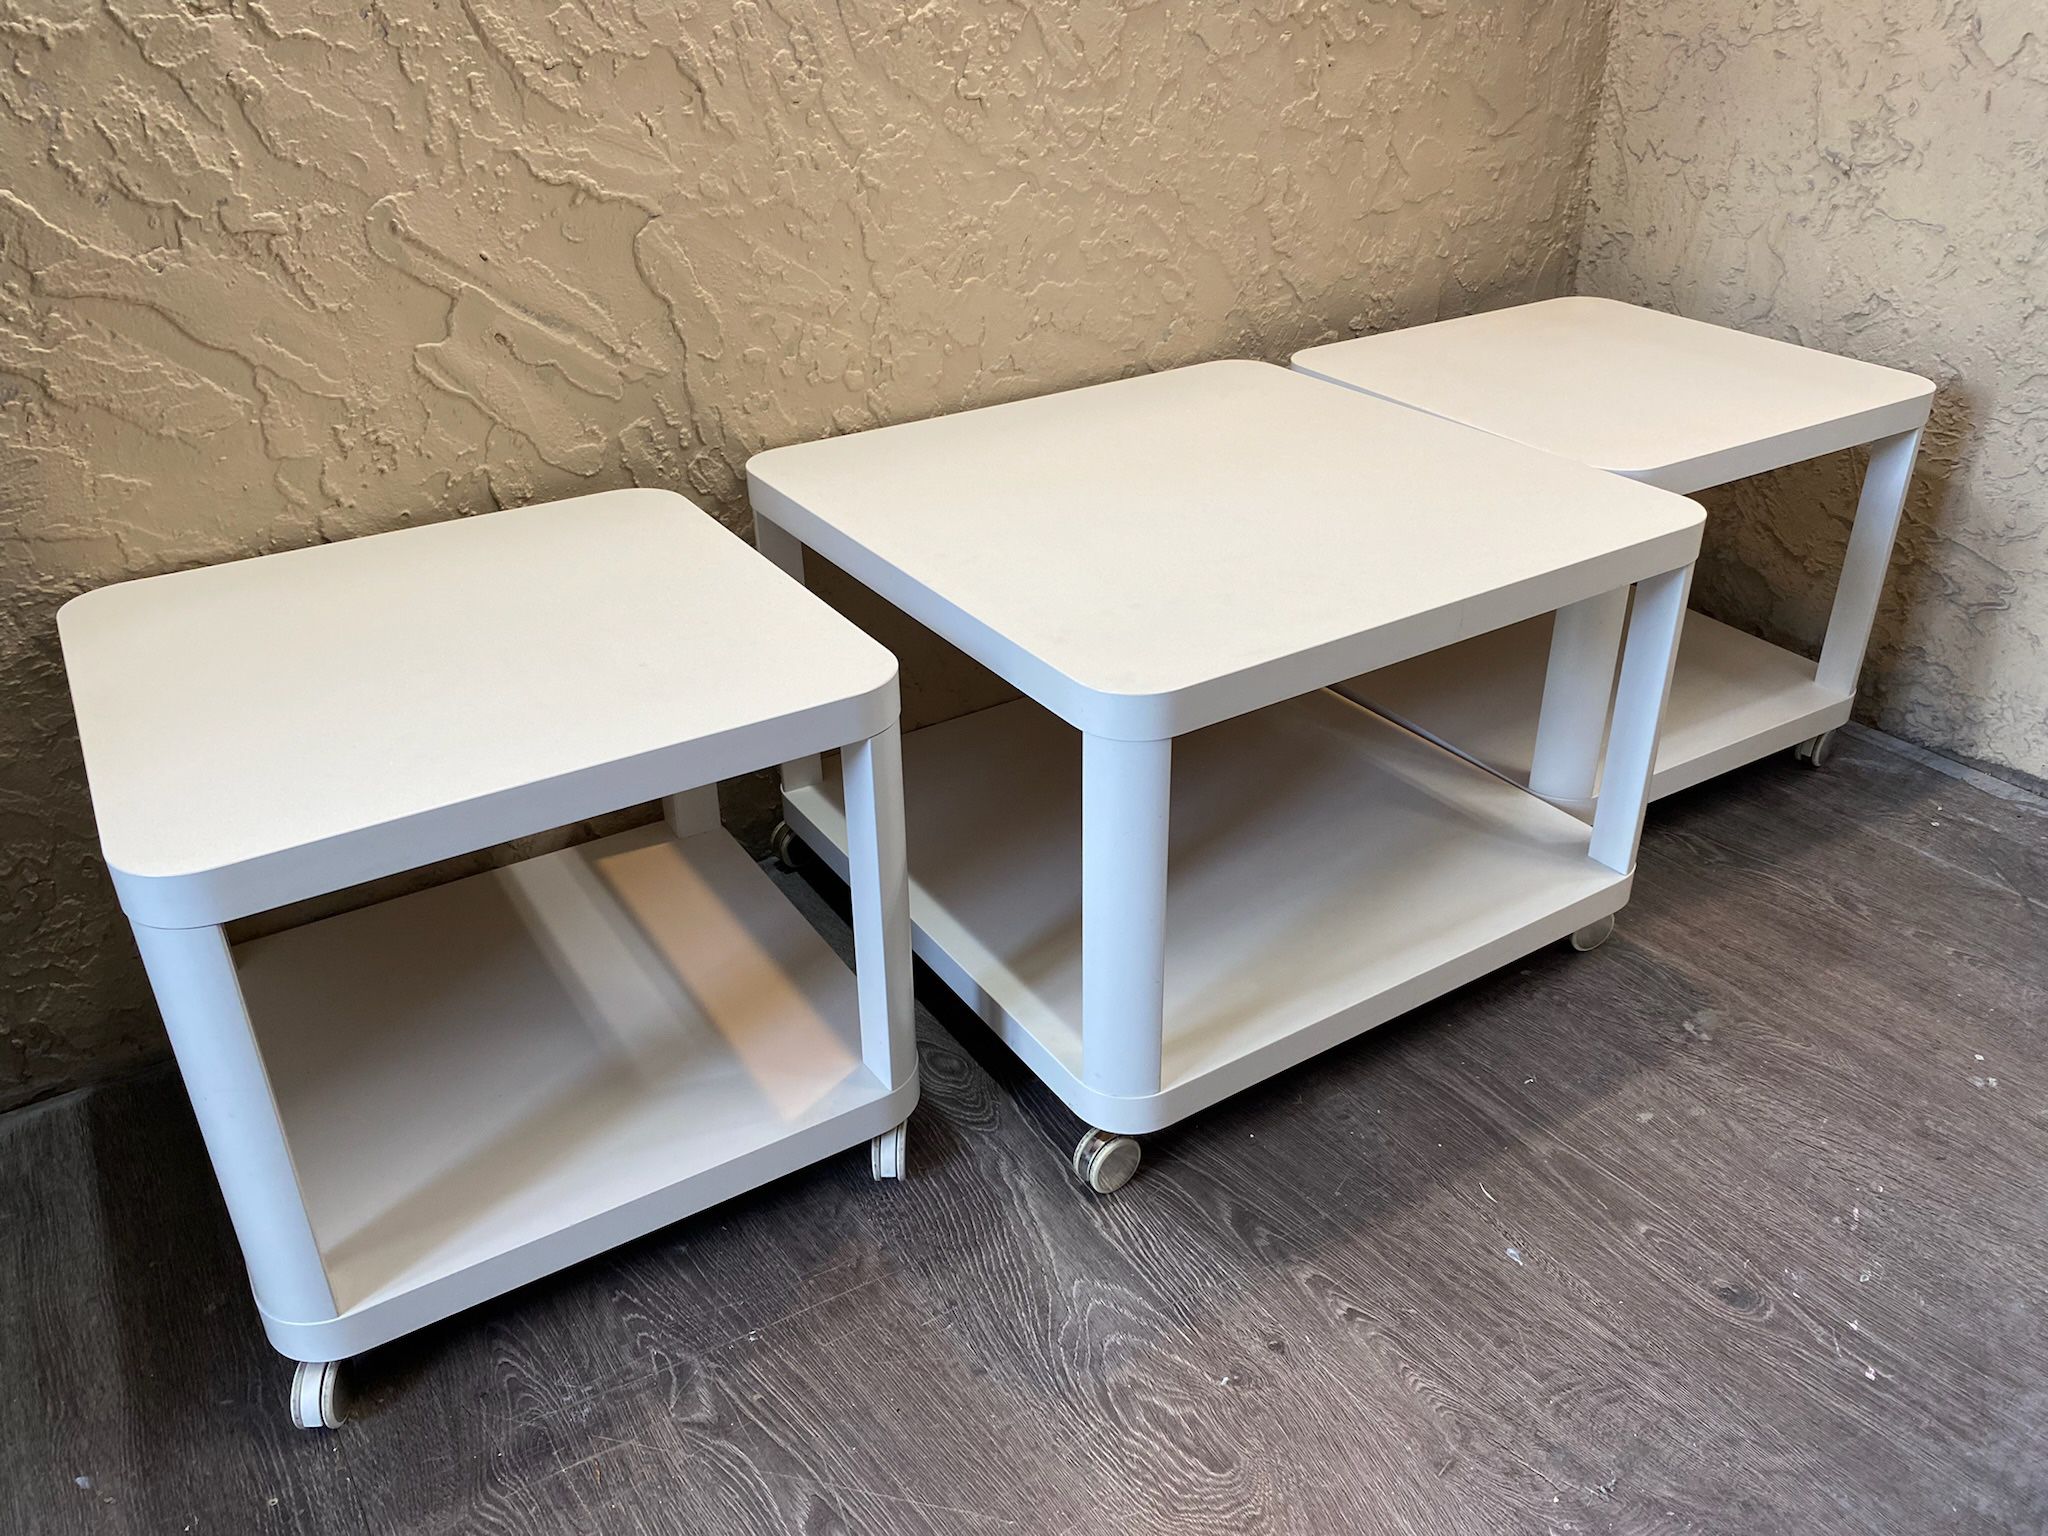 IKEA TINGBY Table Set on Wheels - Local Delivery for a Fee - See My Items